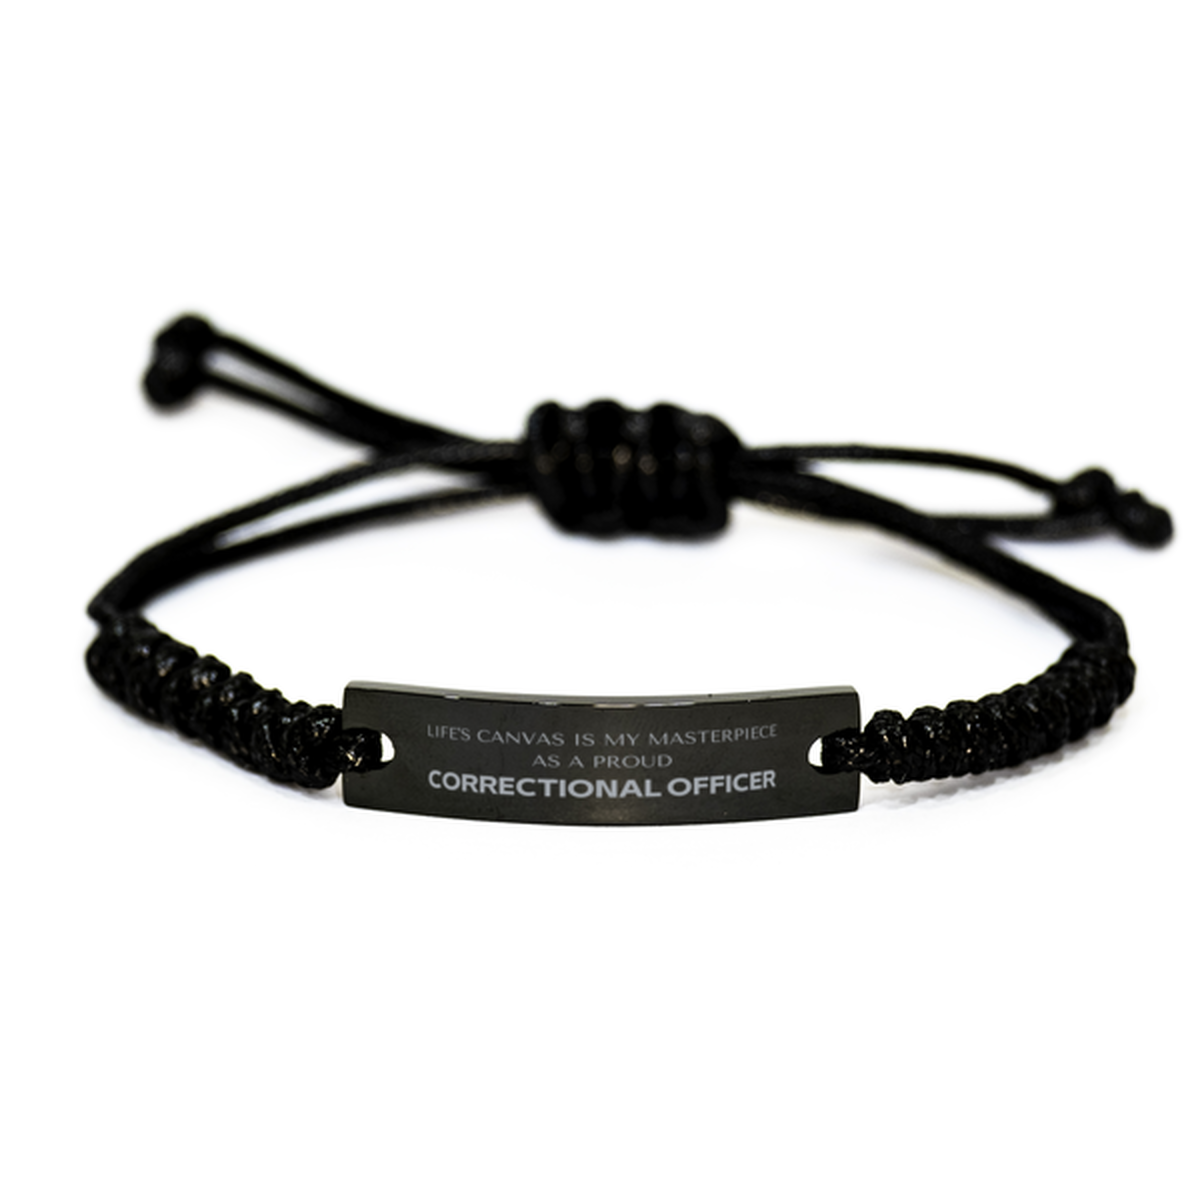 Proud Correctional Officer Gifts, Life's canvas is my masterpiece, Epic Birthday Christmas Unique Black Rope Bracelet For Correctional Officer, Coworkers, Men, Women, Friends